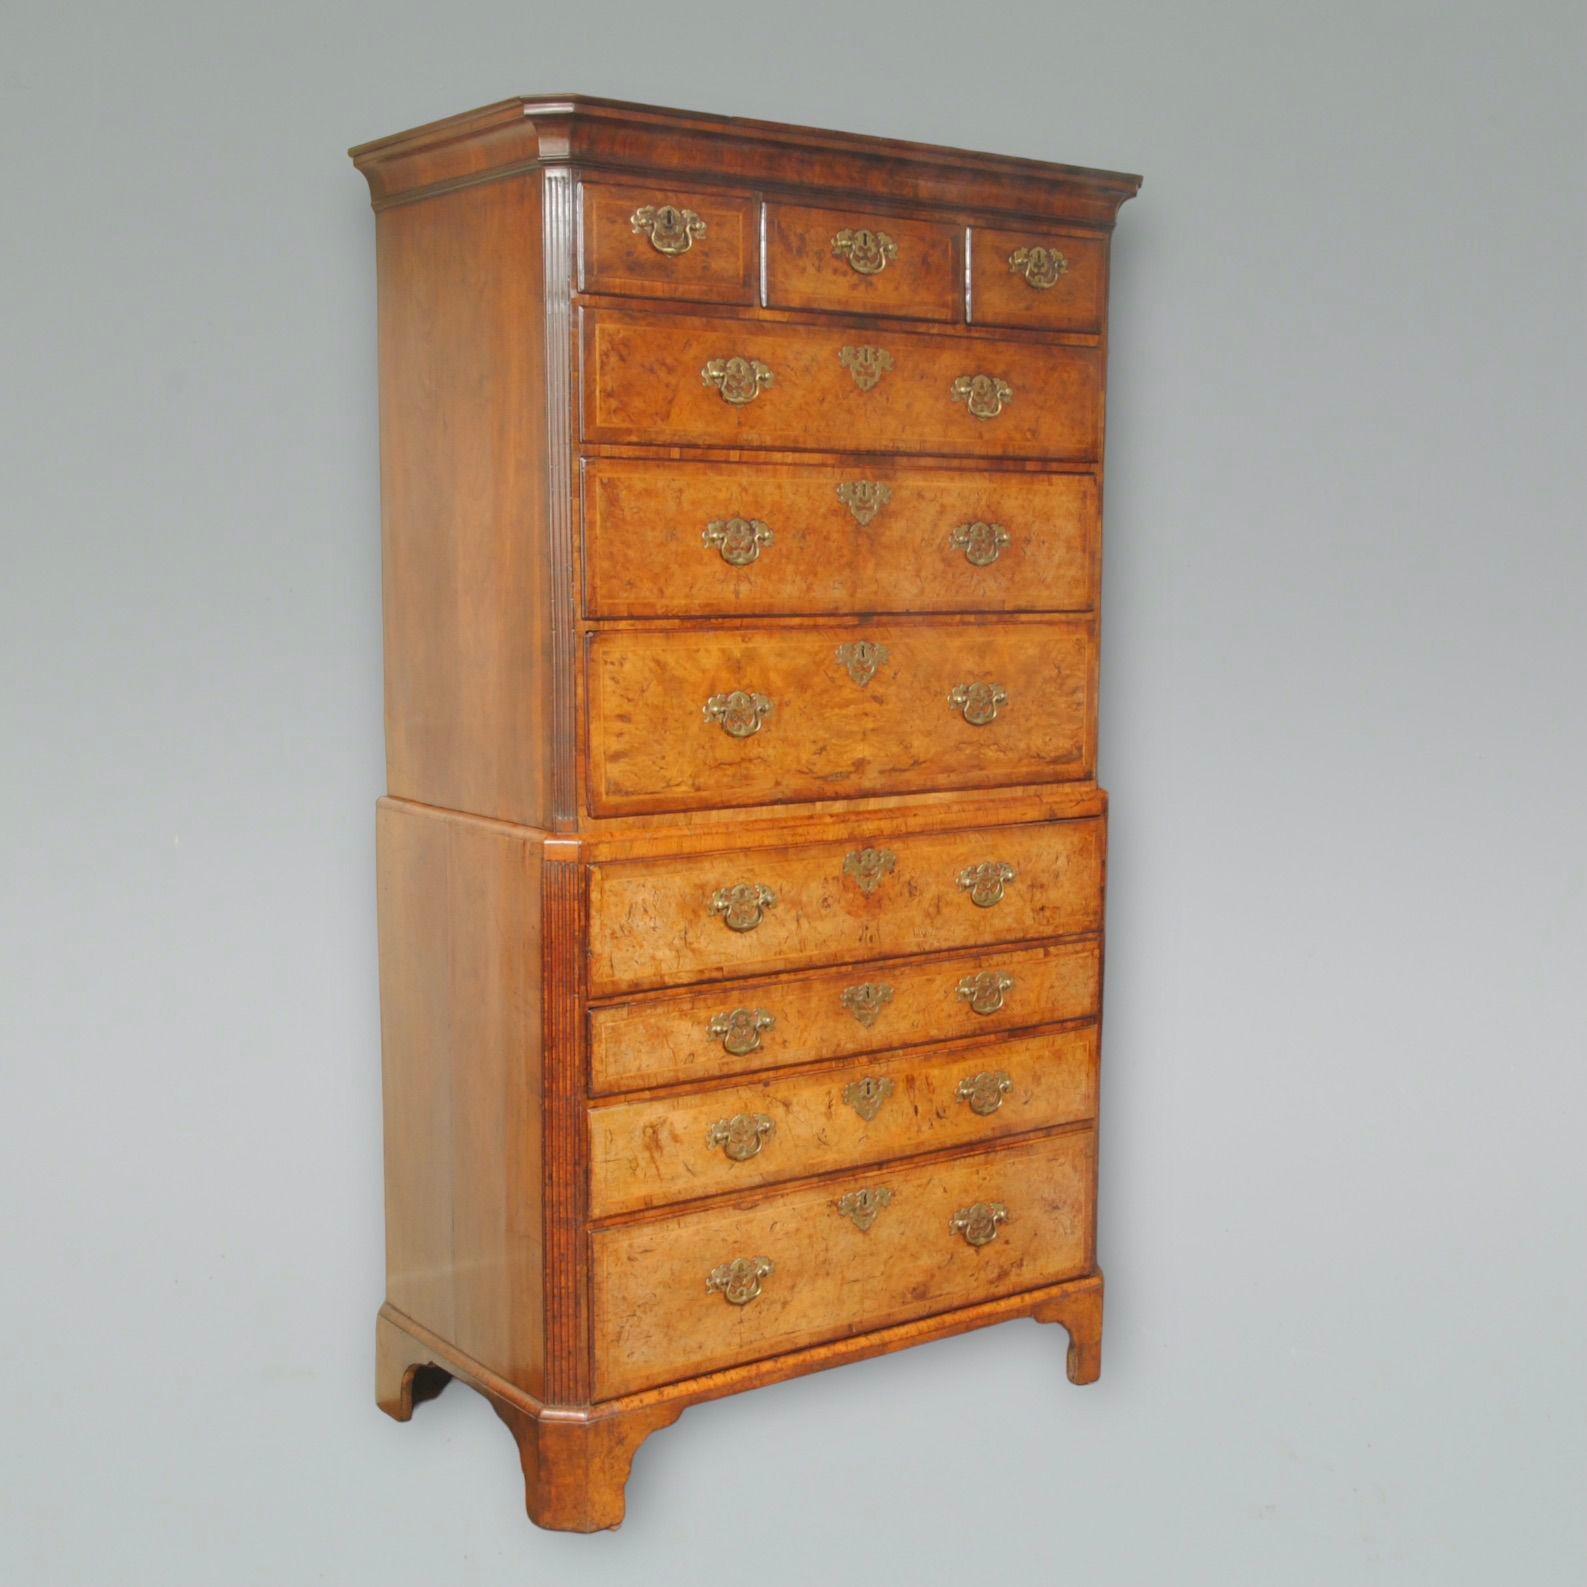 An 18th century burr walnut secretaire chest on chest with original brass handles and canted corners to both parts.
The secretaire drawer with fitted interior 
circa 1725.